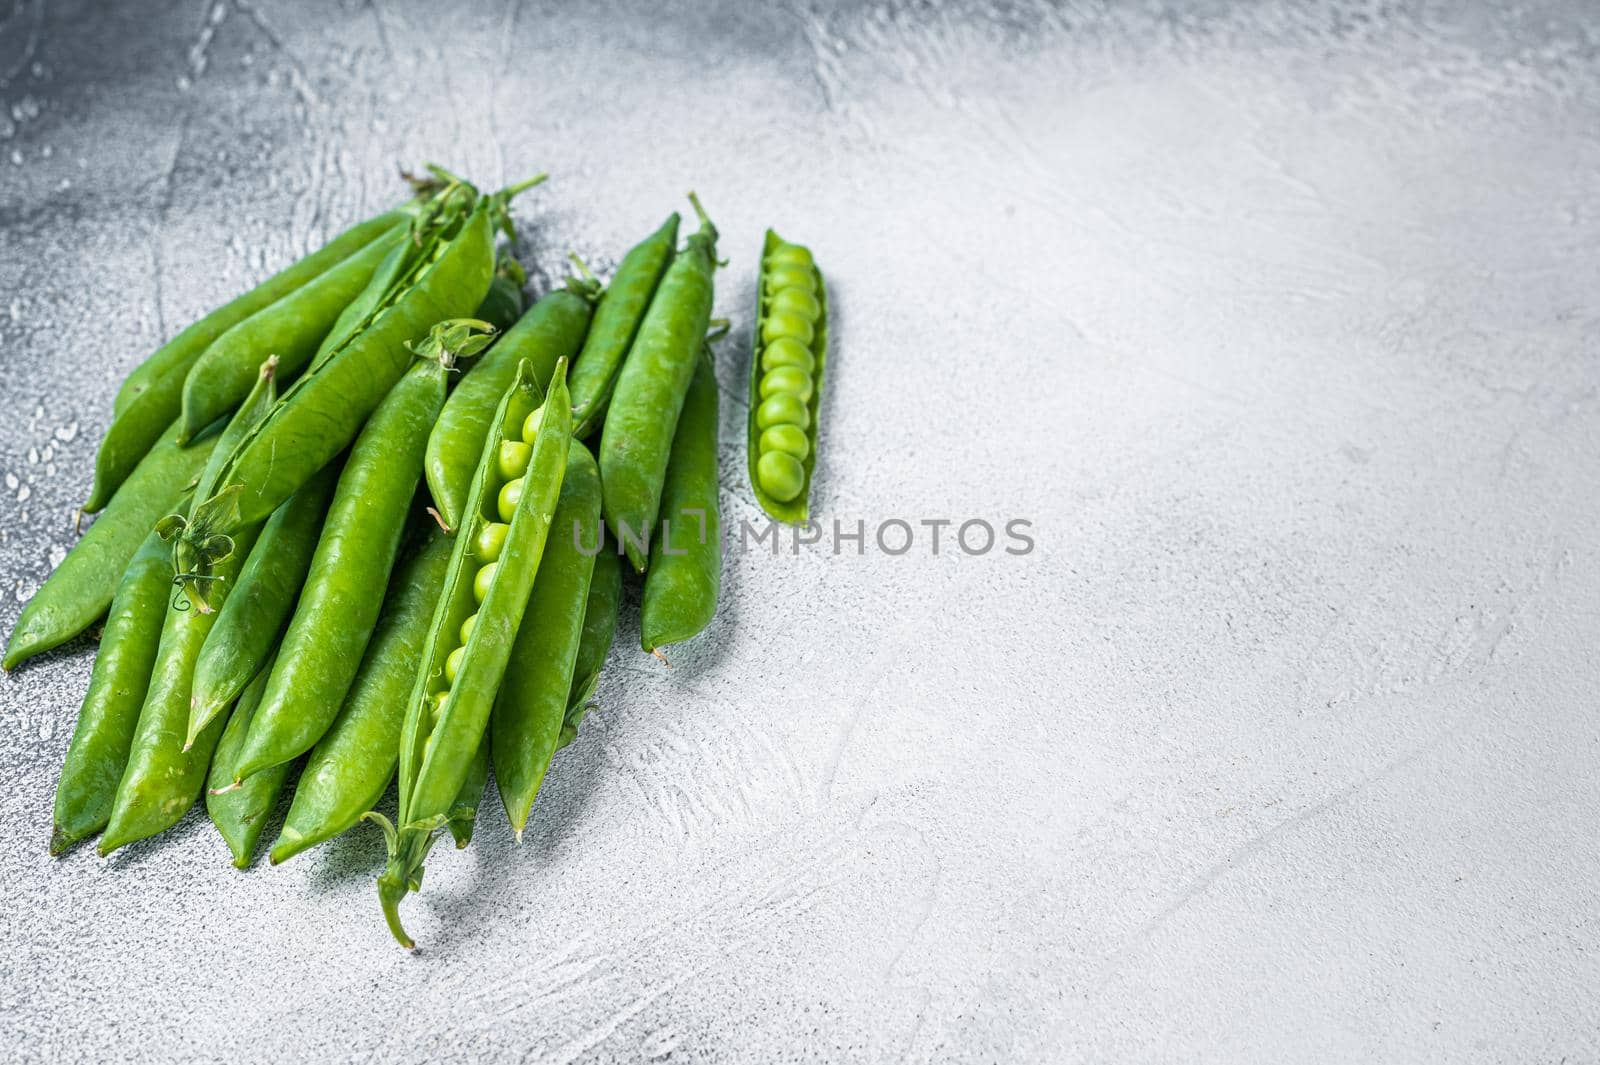 Peas and green pea pods on a kitchen table. White background. Top view. Copy space.